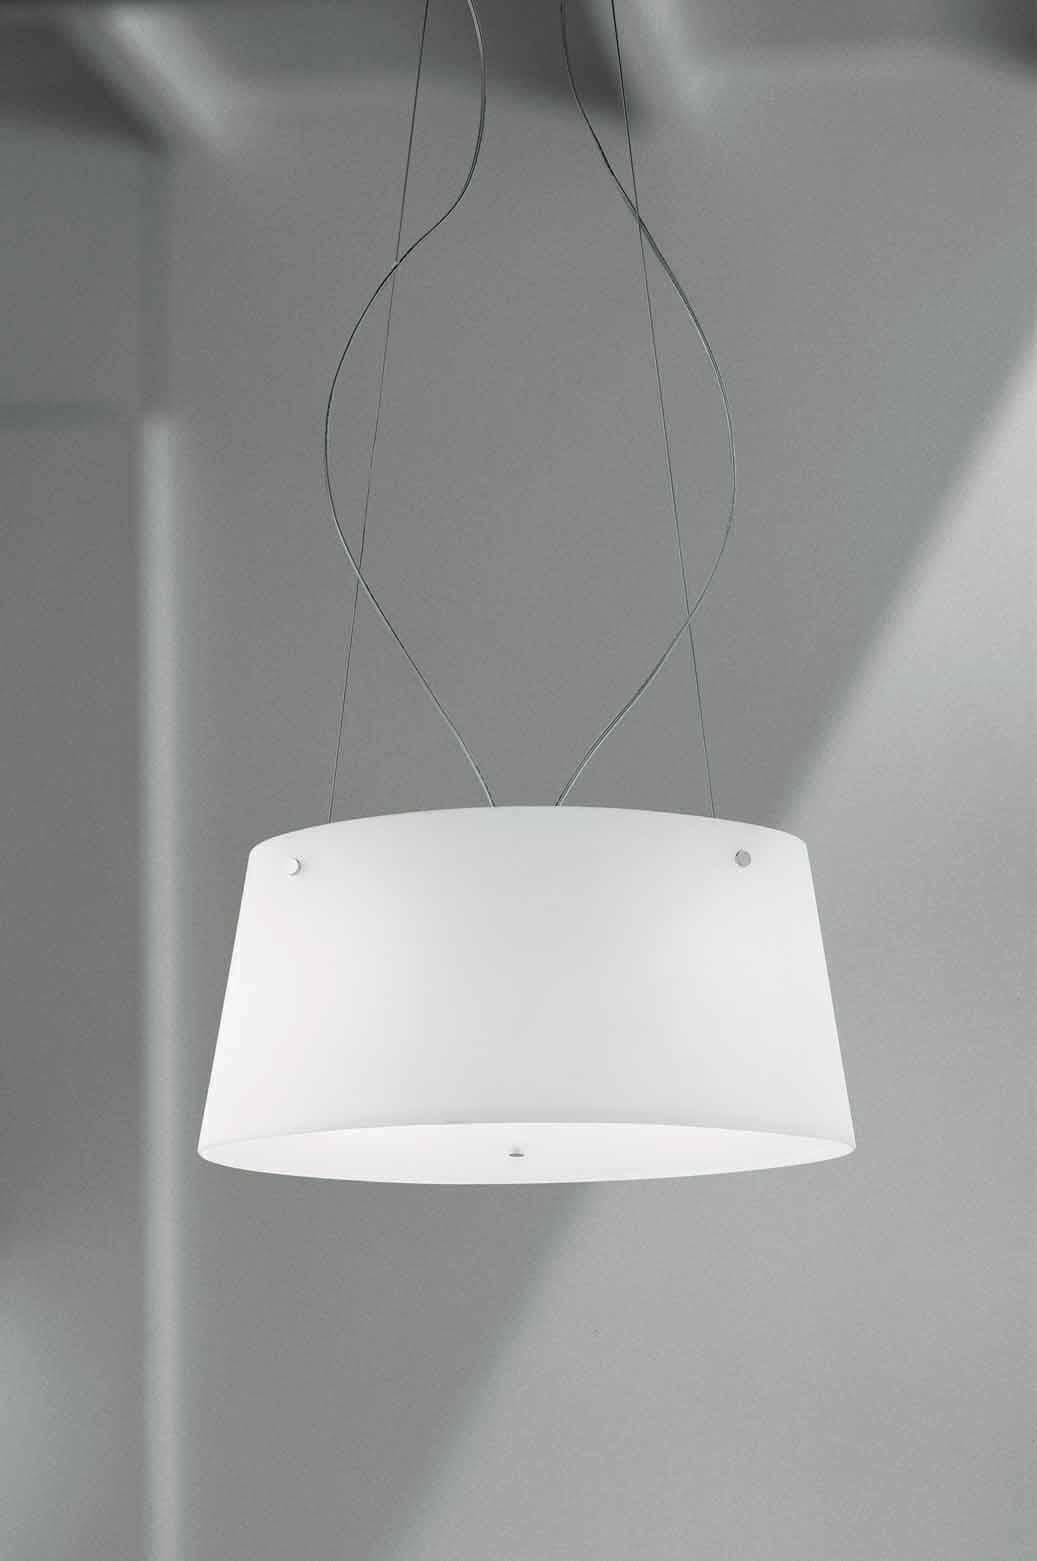 A satin blown glass wall pendant made of a conical base and a ovoid shape. Glass color tone in white. Visible metal parts in satin nickel. LED dimmable lighting. Dimensions are in reference to the light fixture and not inclusive of the hanging